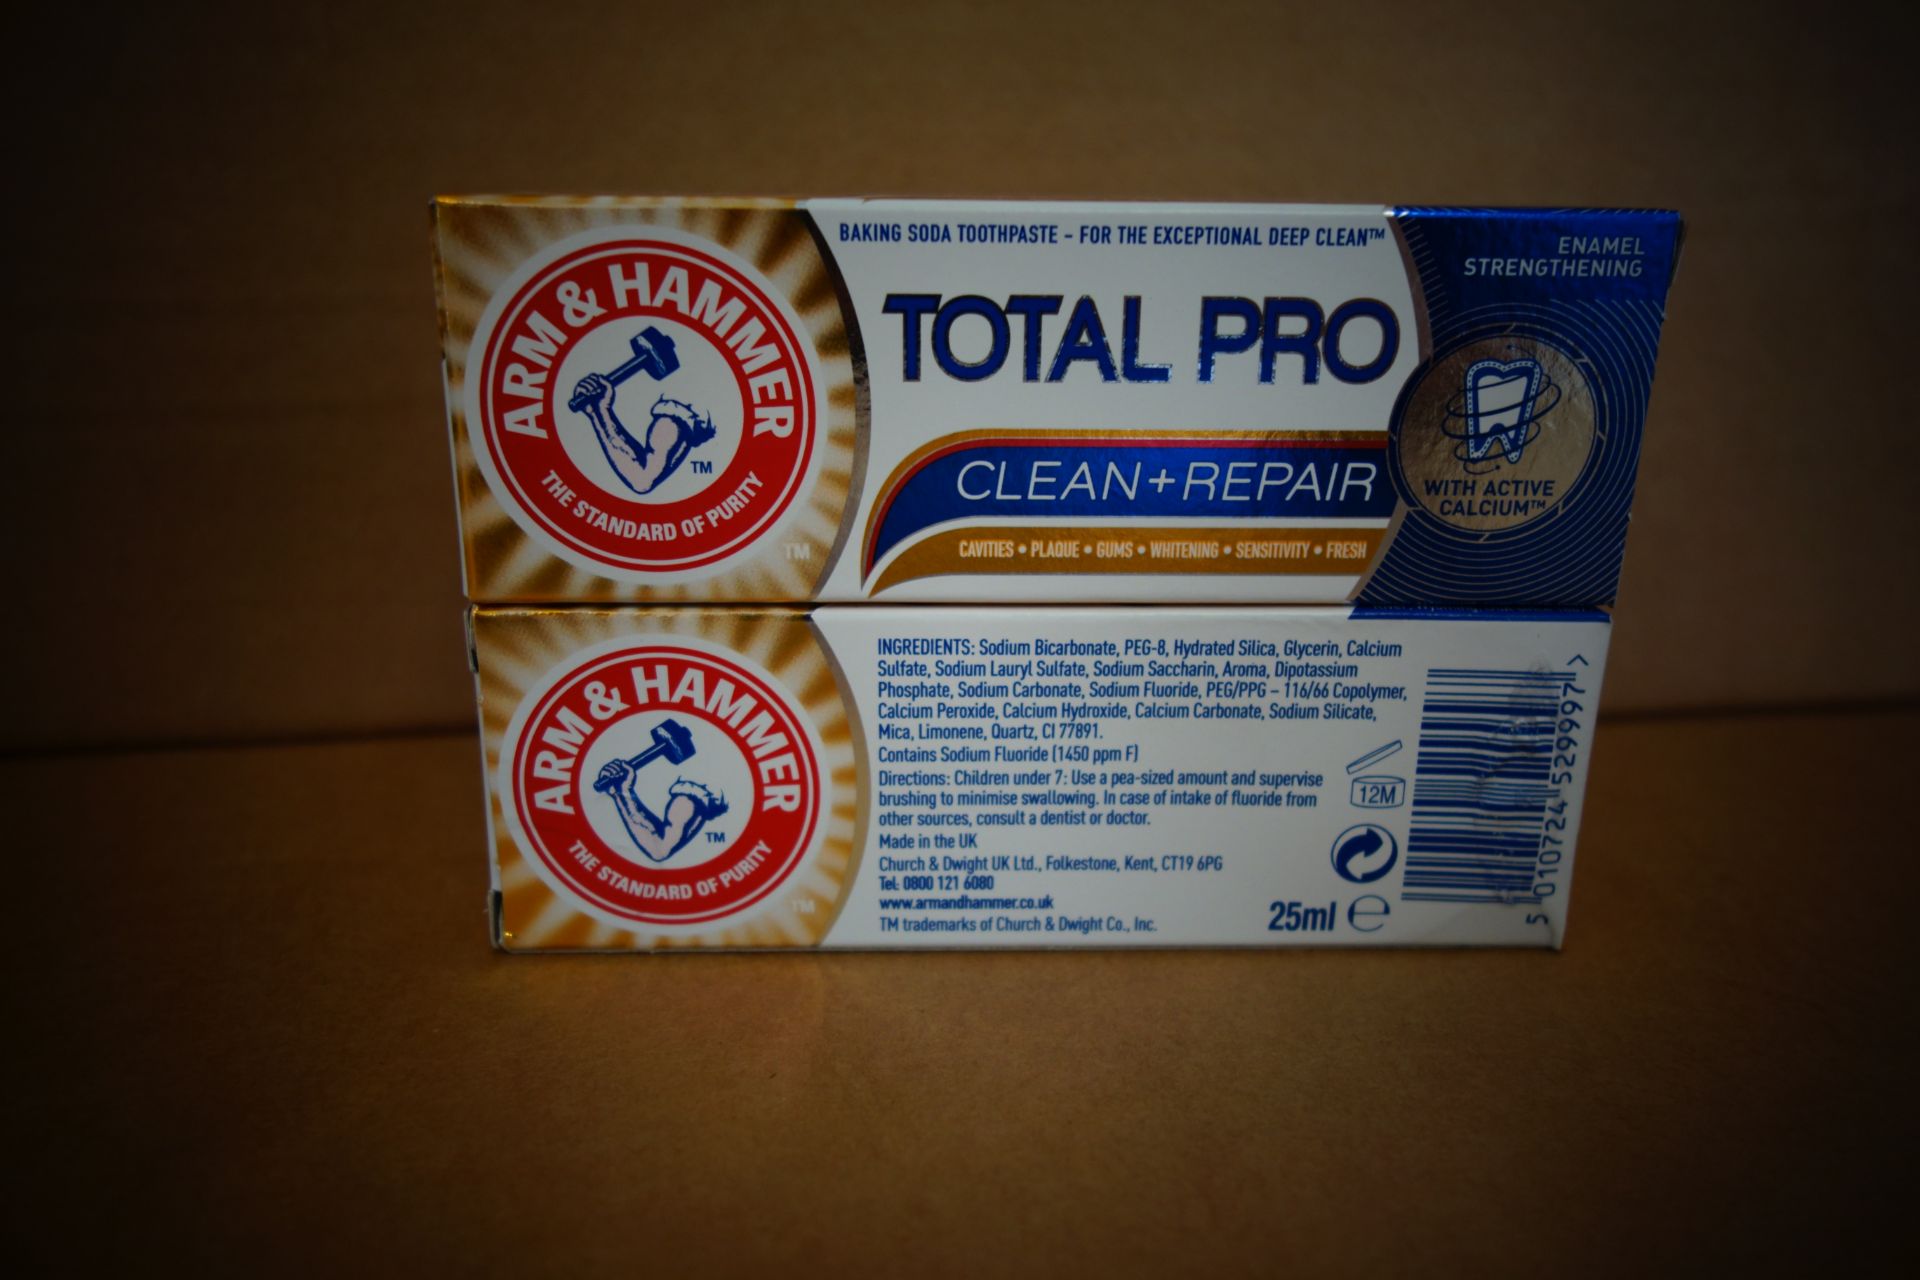 144 x Arm & Hammer Total Pro Clean + Repair Toothpaste 25ml. Suitable for use up to 12 months from